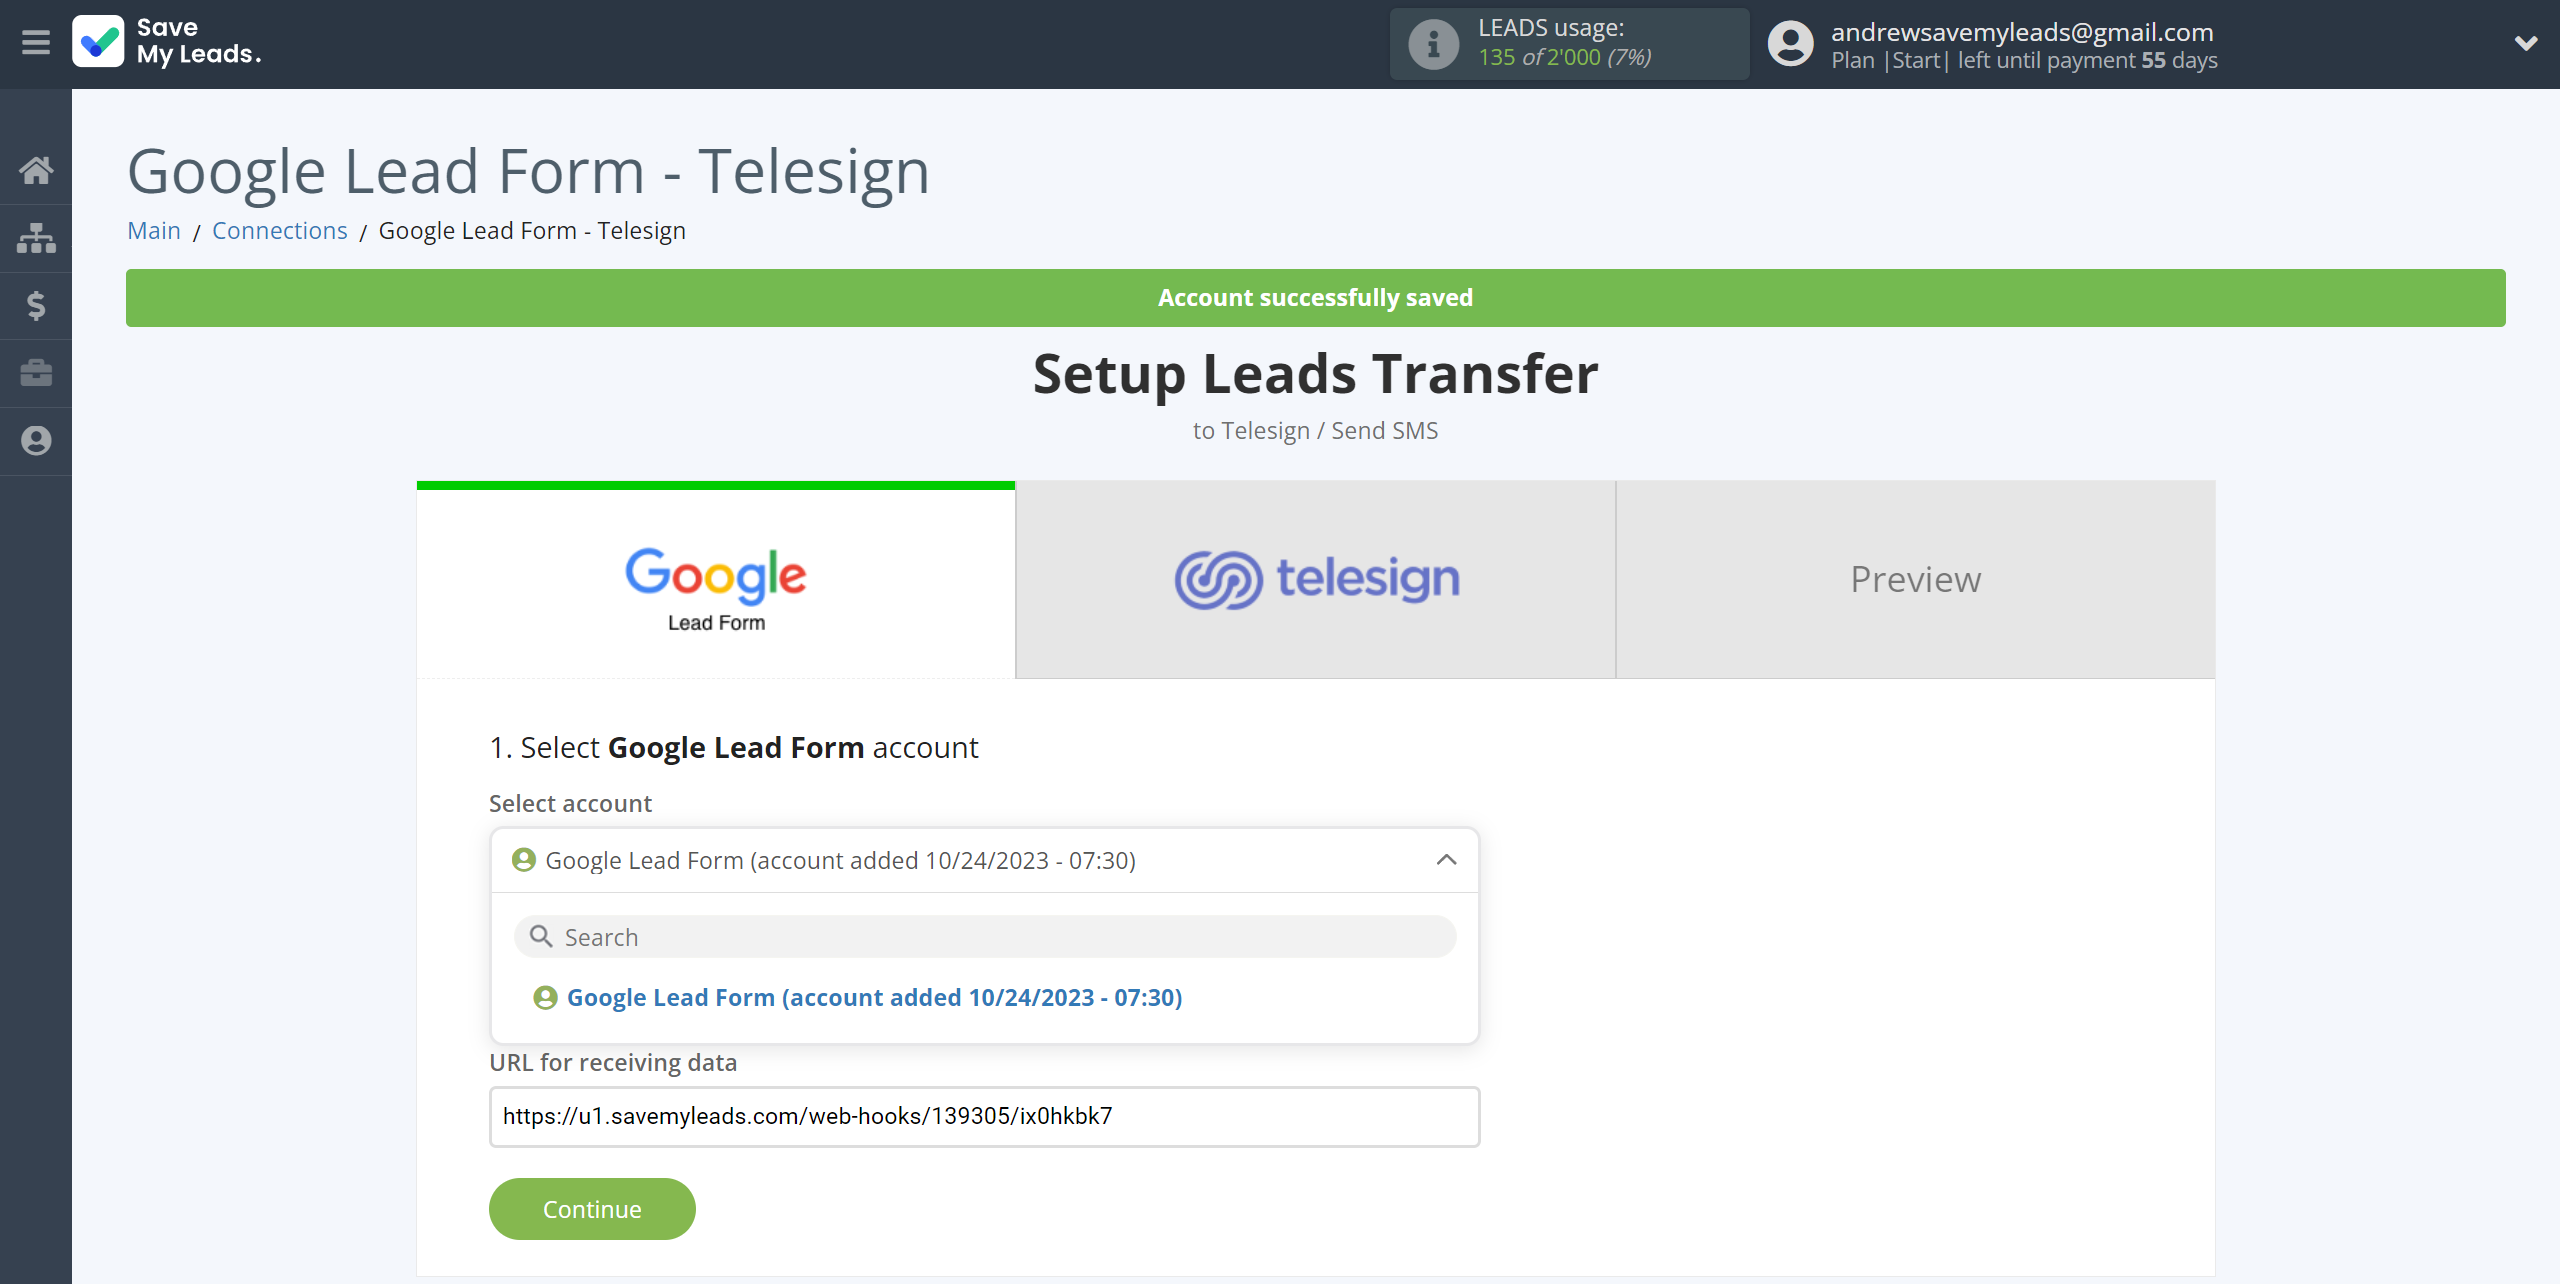 How to Connect Google Lead Form with Telesign | Data Source account selection